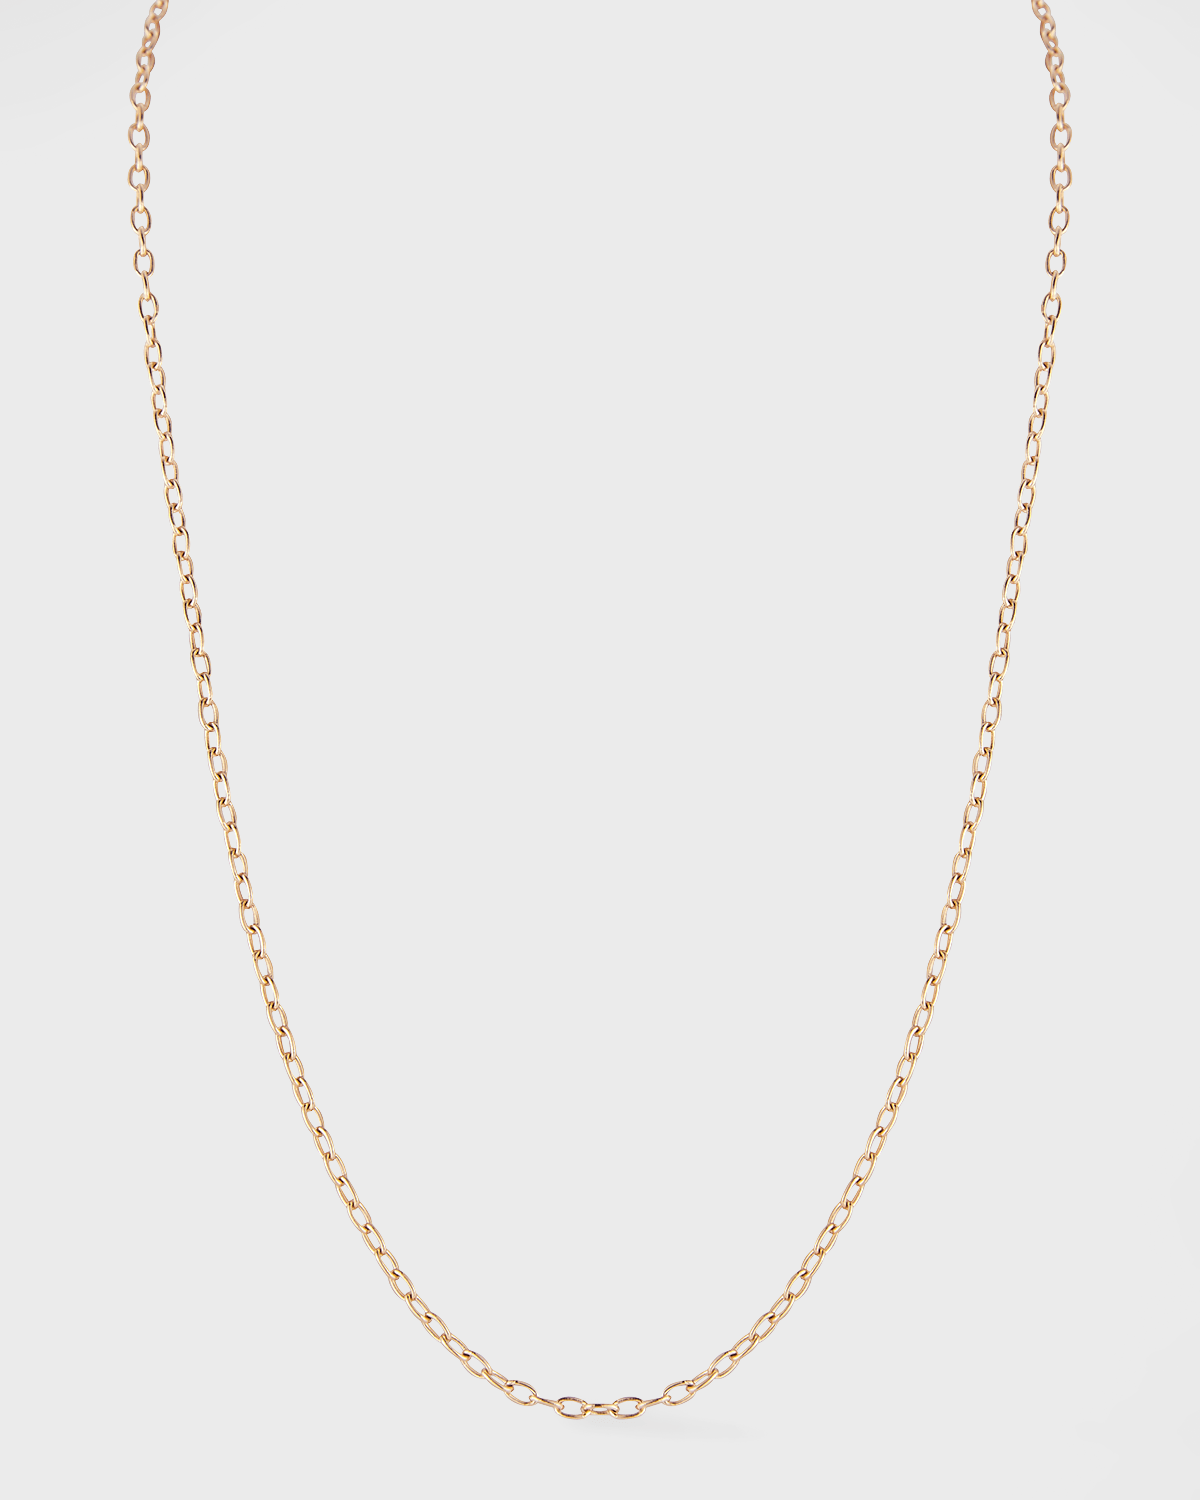 18K Rose Gold Chain Necklace, 32"L